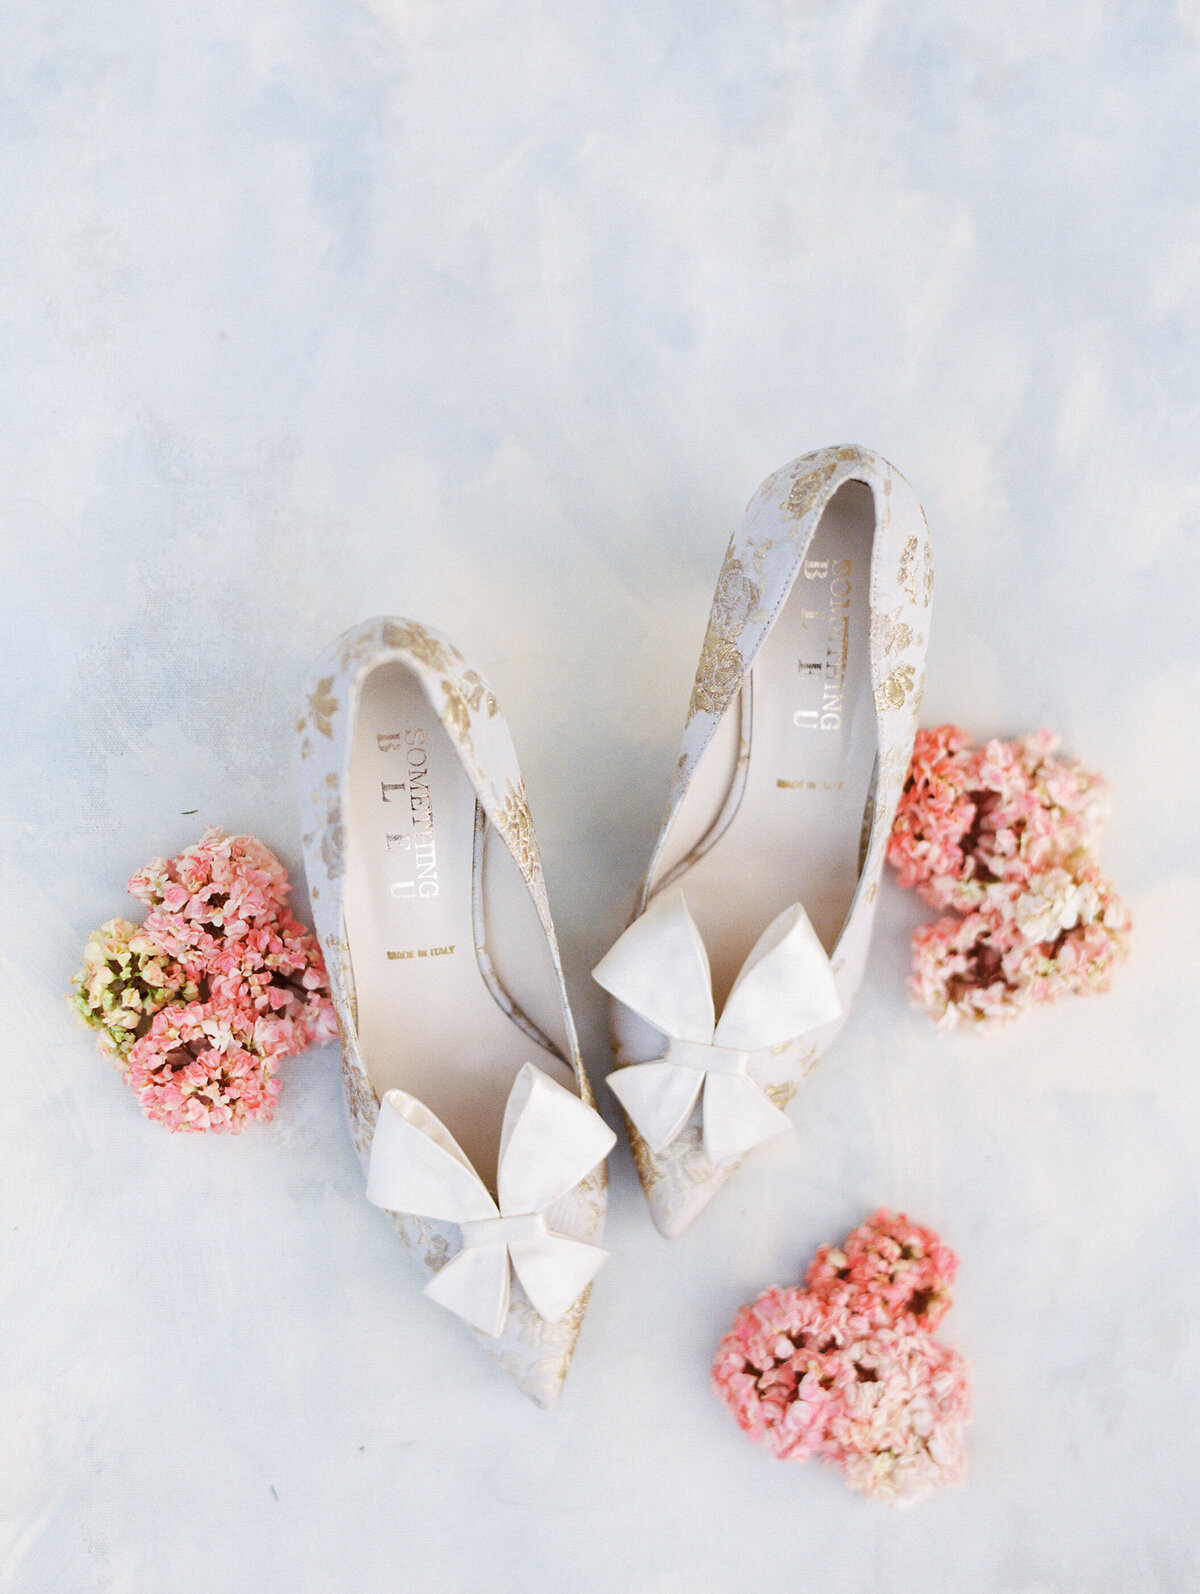 wedding shoes with pink flowers around them